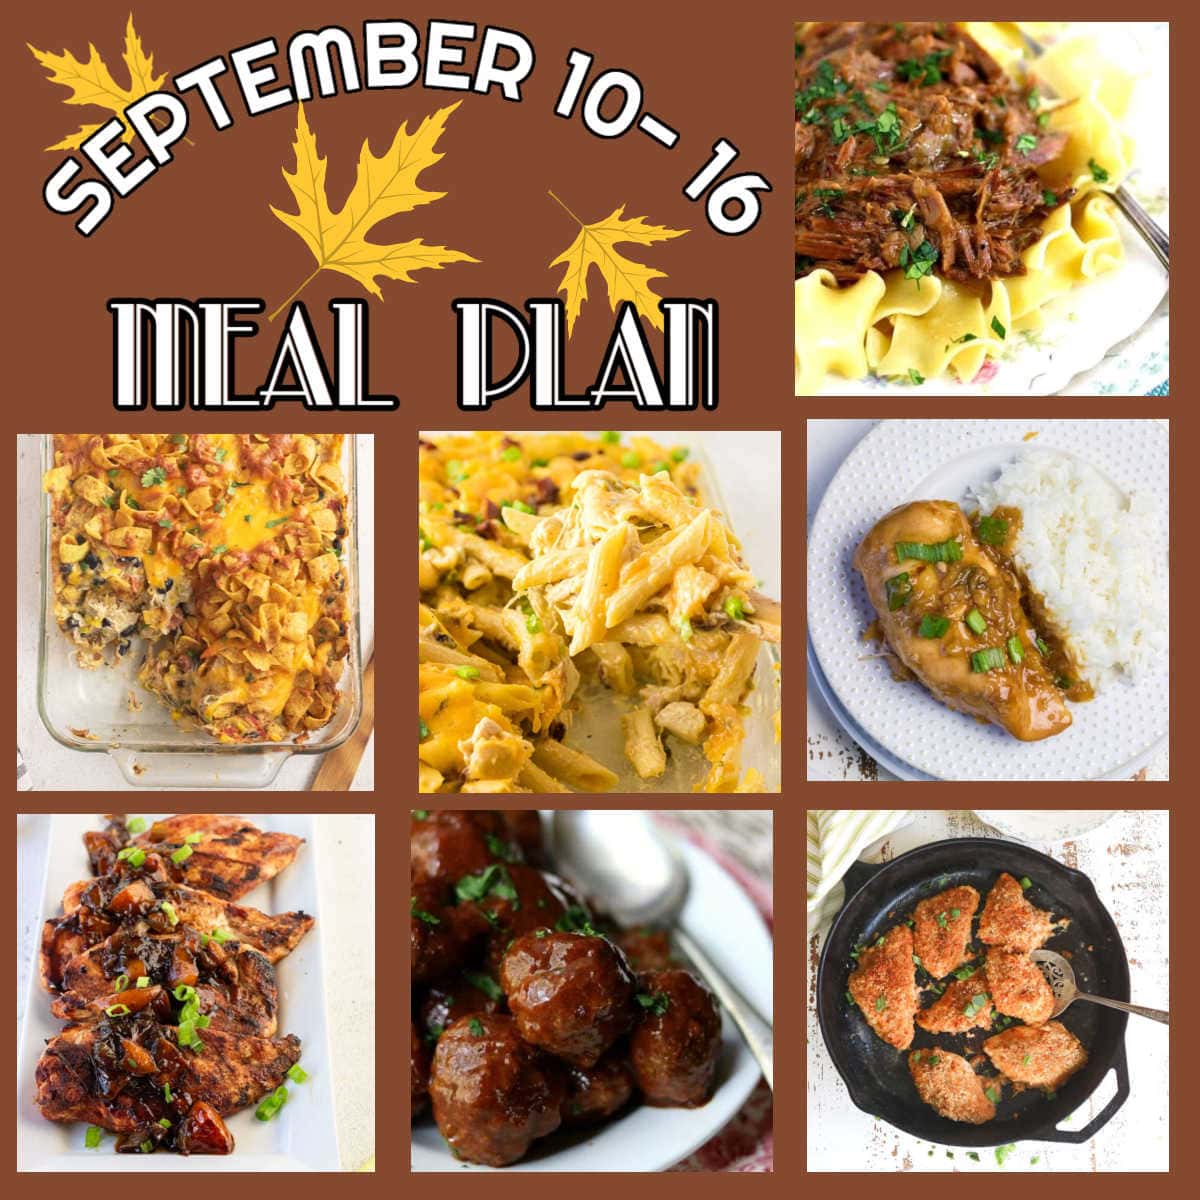 September 10-16 menu plan collage with images and text overlay.